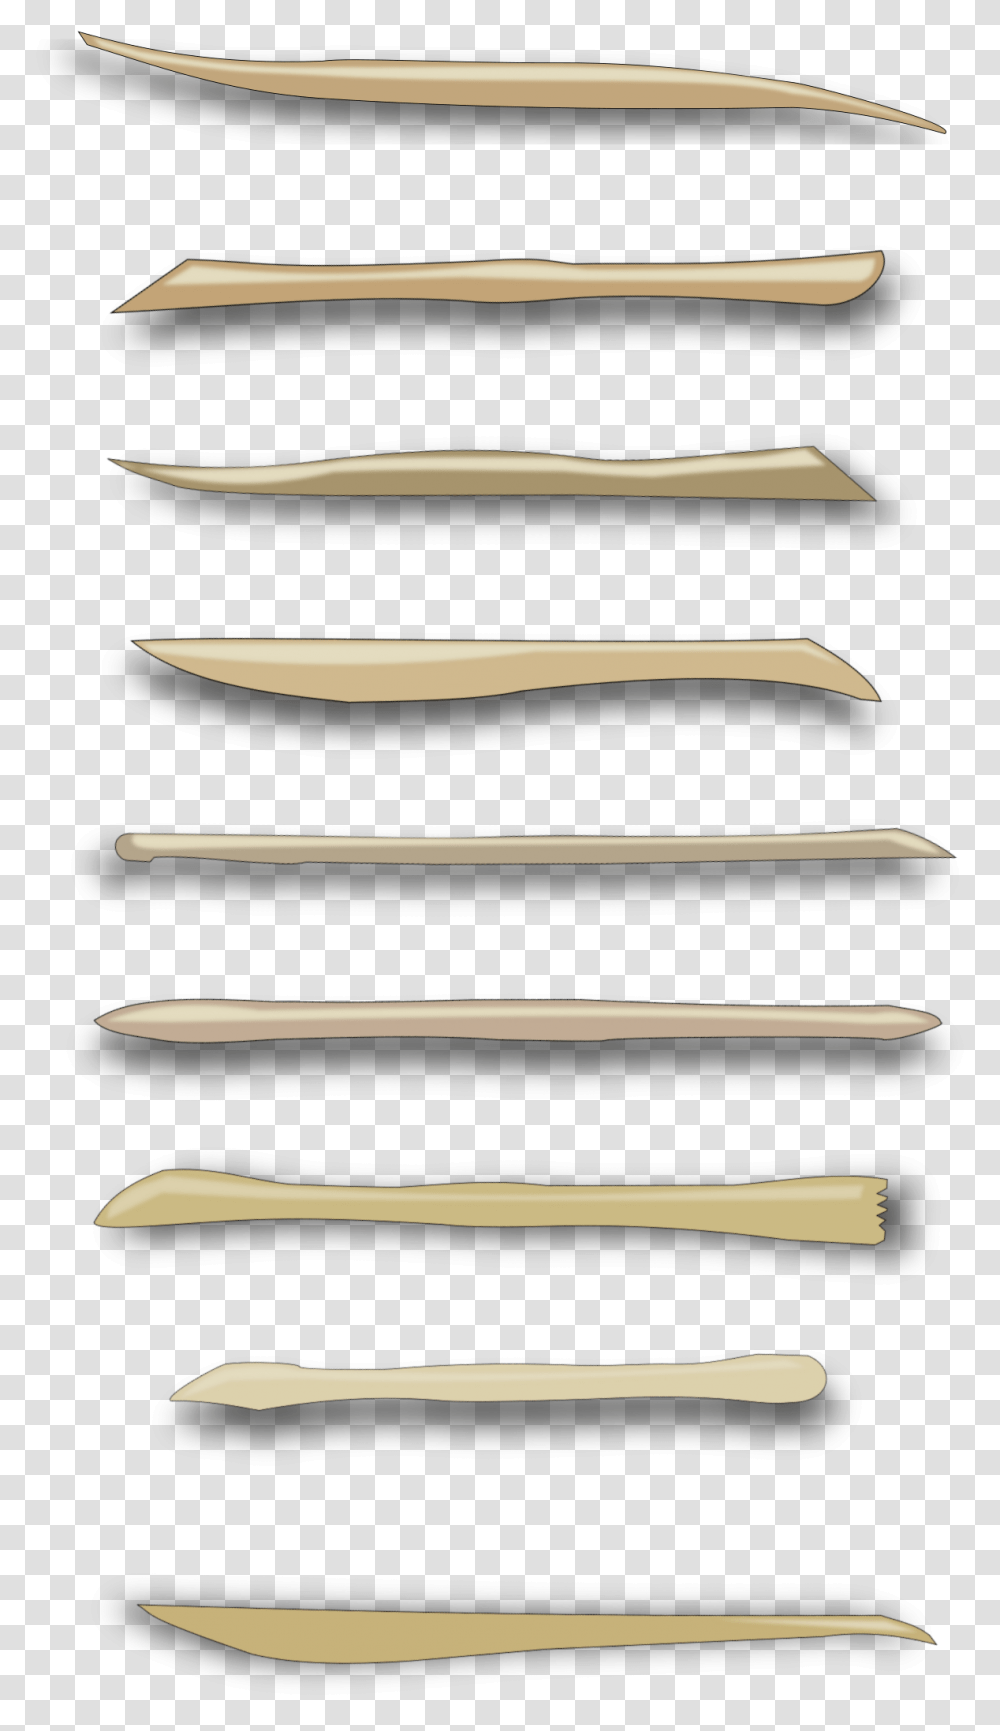 Clay Modelling Tools Clip Arts Modelling Clay Tools, Cutlery, Weapon, Weaponry, Letter Opener Transparent Png